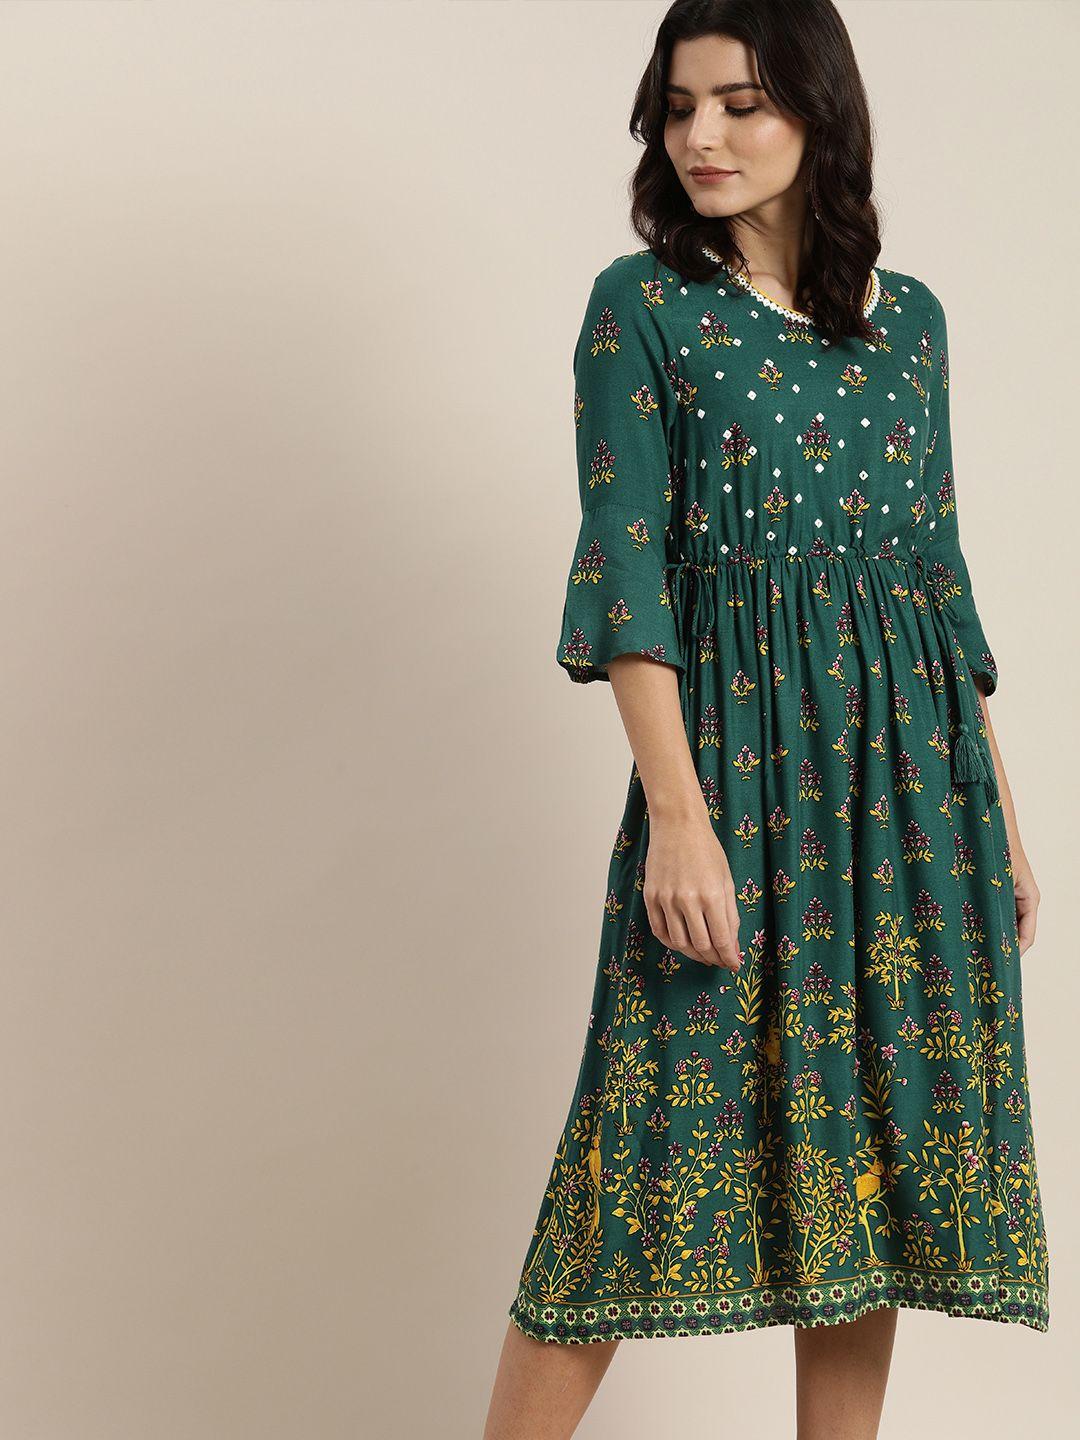 all about you women green floral print fit & flare dress